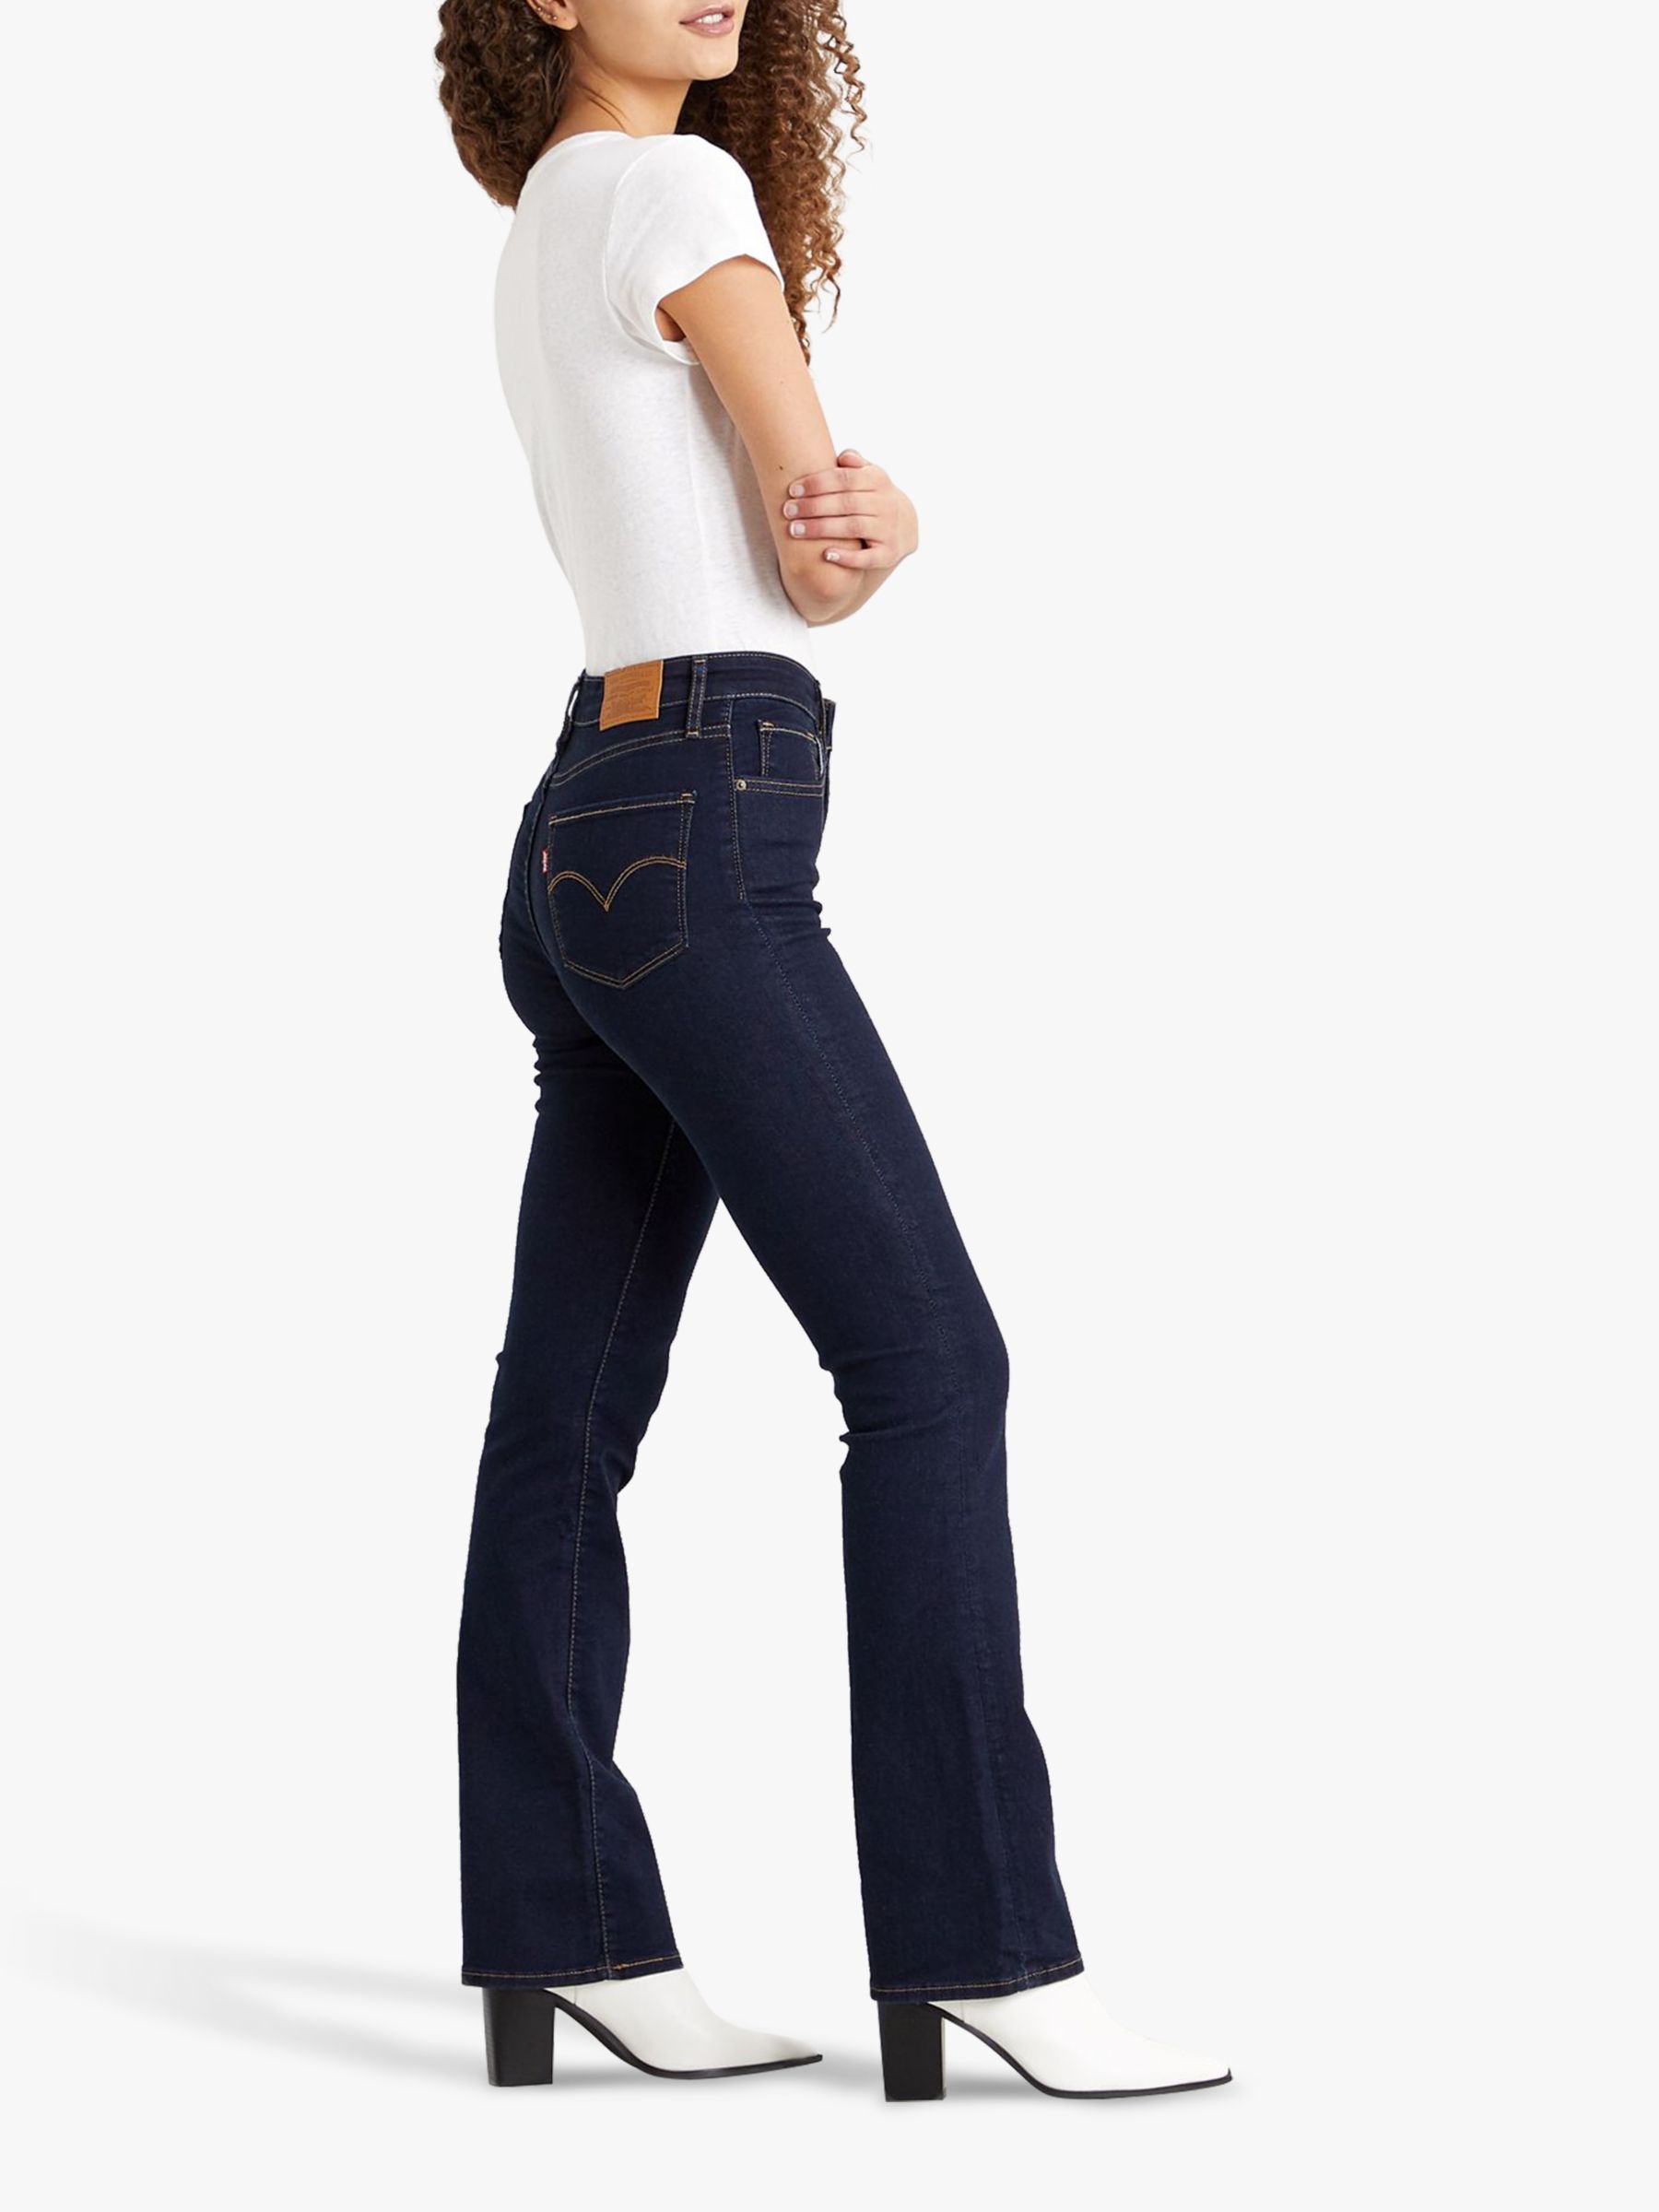 ugentlig nyse Kompliment Levi's 725 High Rise Boot Cut Jeans, To The Nine at John Lewis & Partners